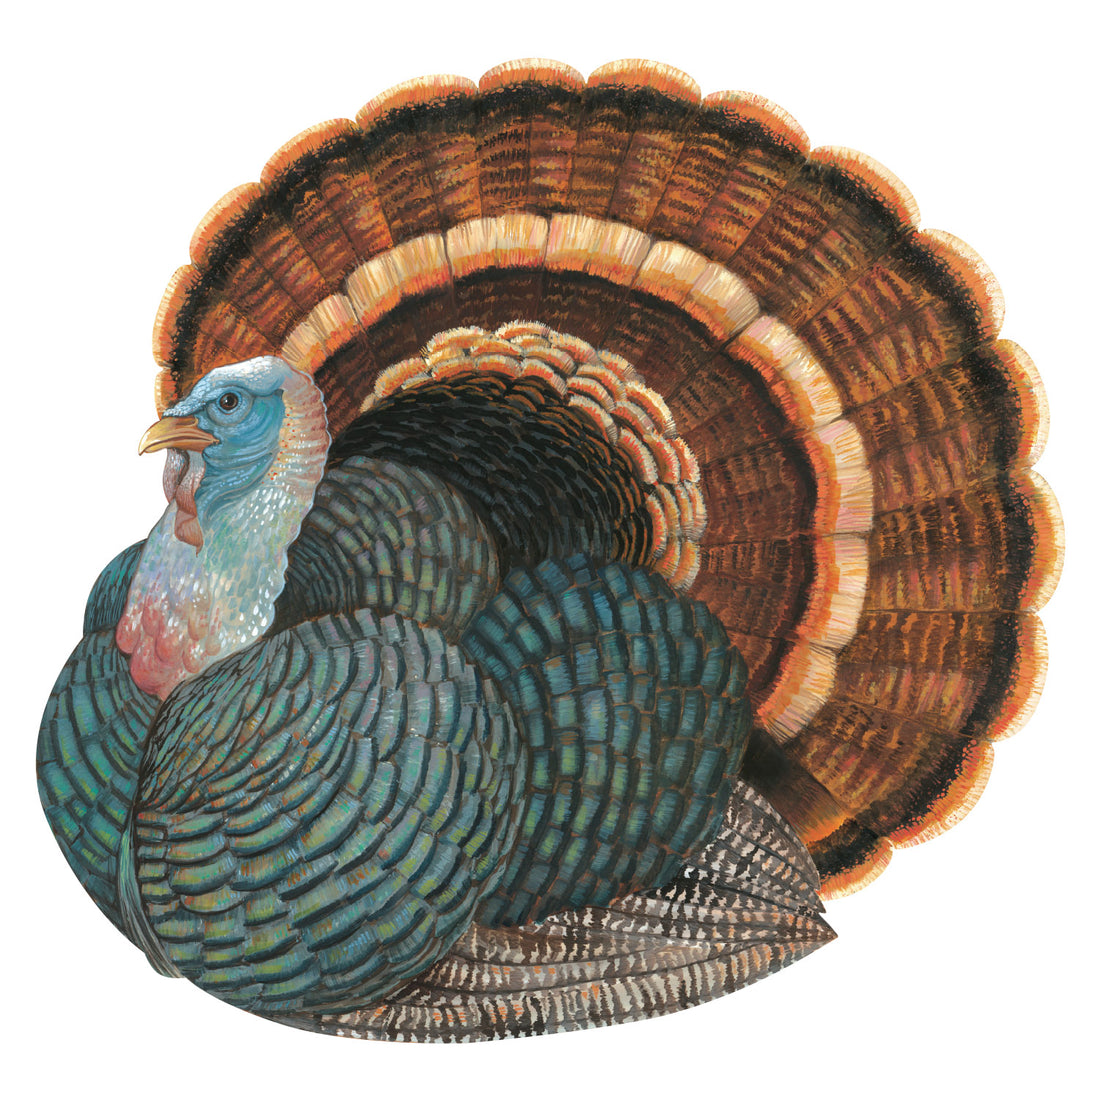 A die-cut illustration of a plump brown, blue and black turkey. 